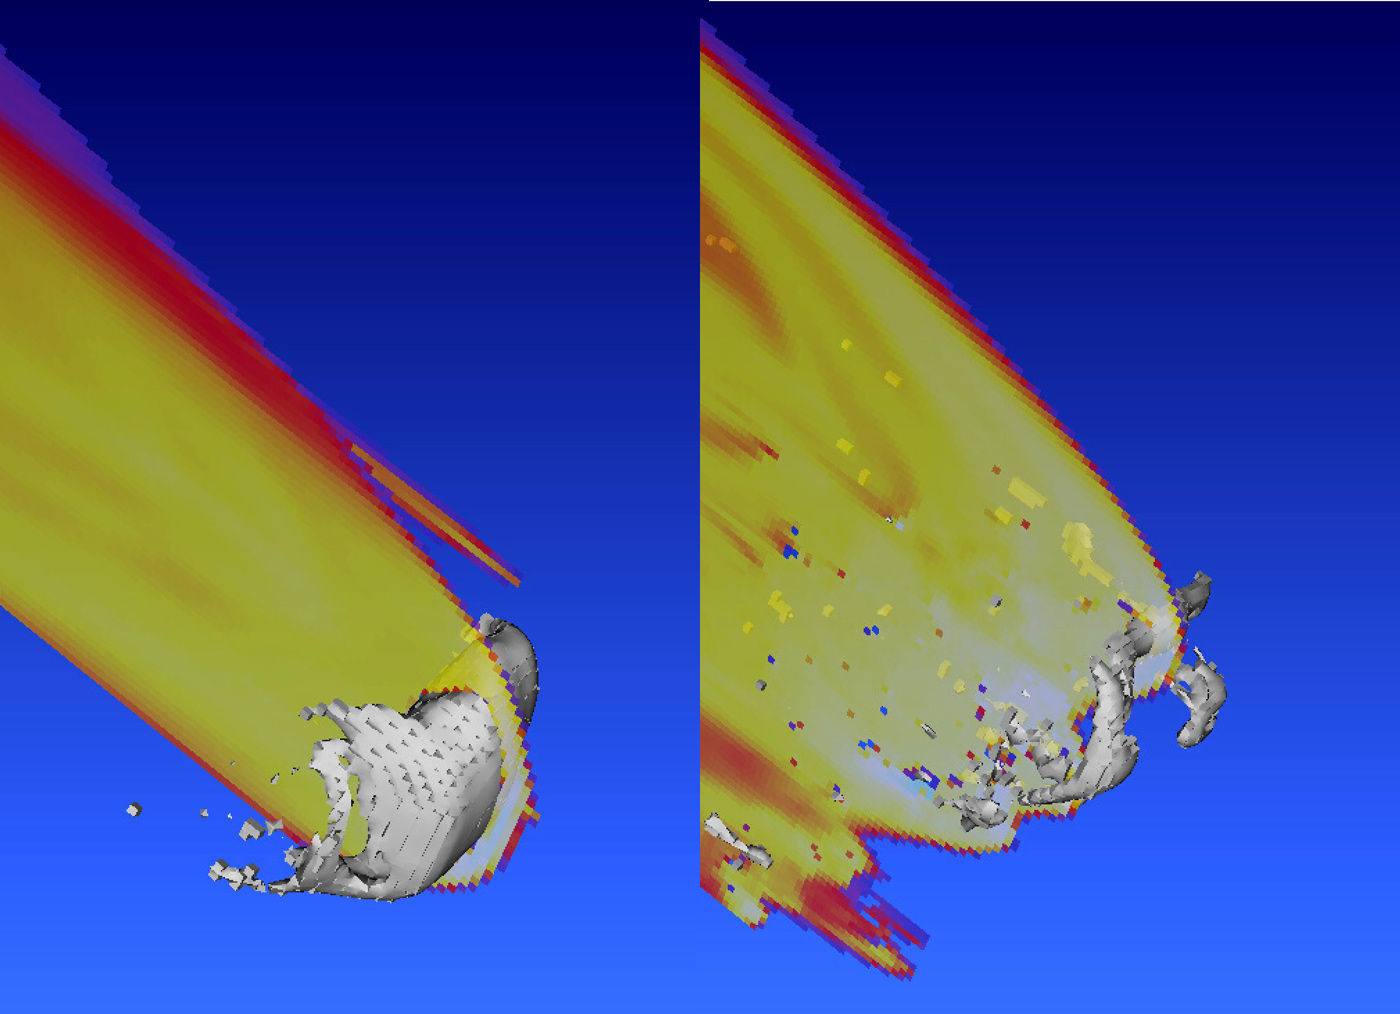 A computer simulation of asteroid 2008 TC3's atmospheric entry and break-up.